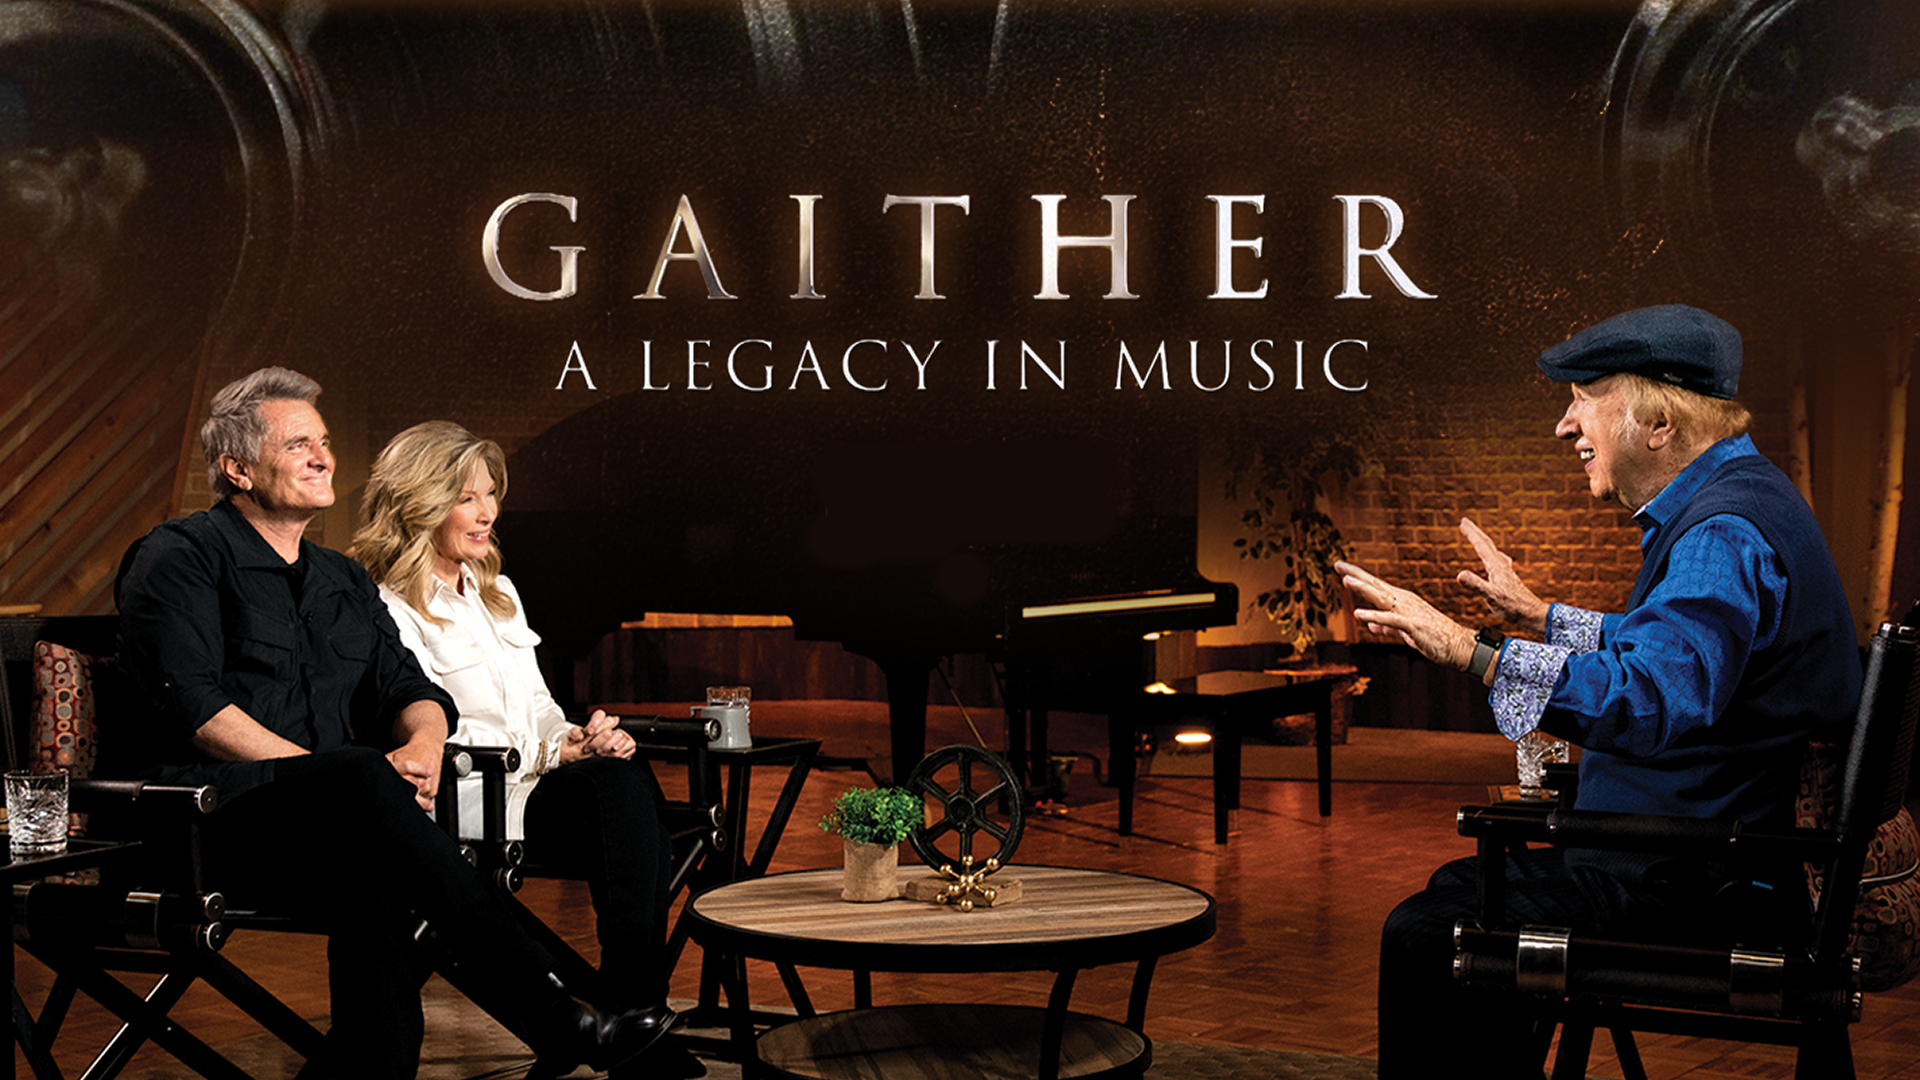 Gaither: A Legacy in Music